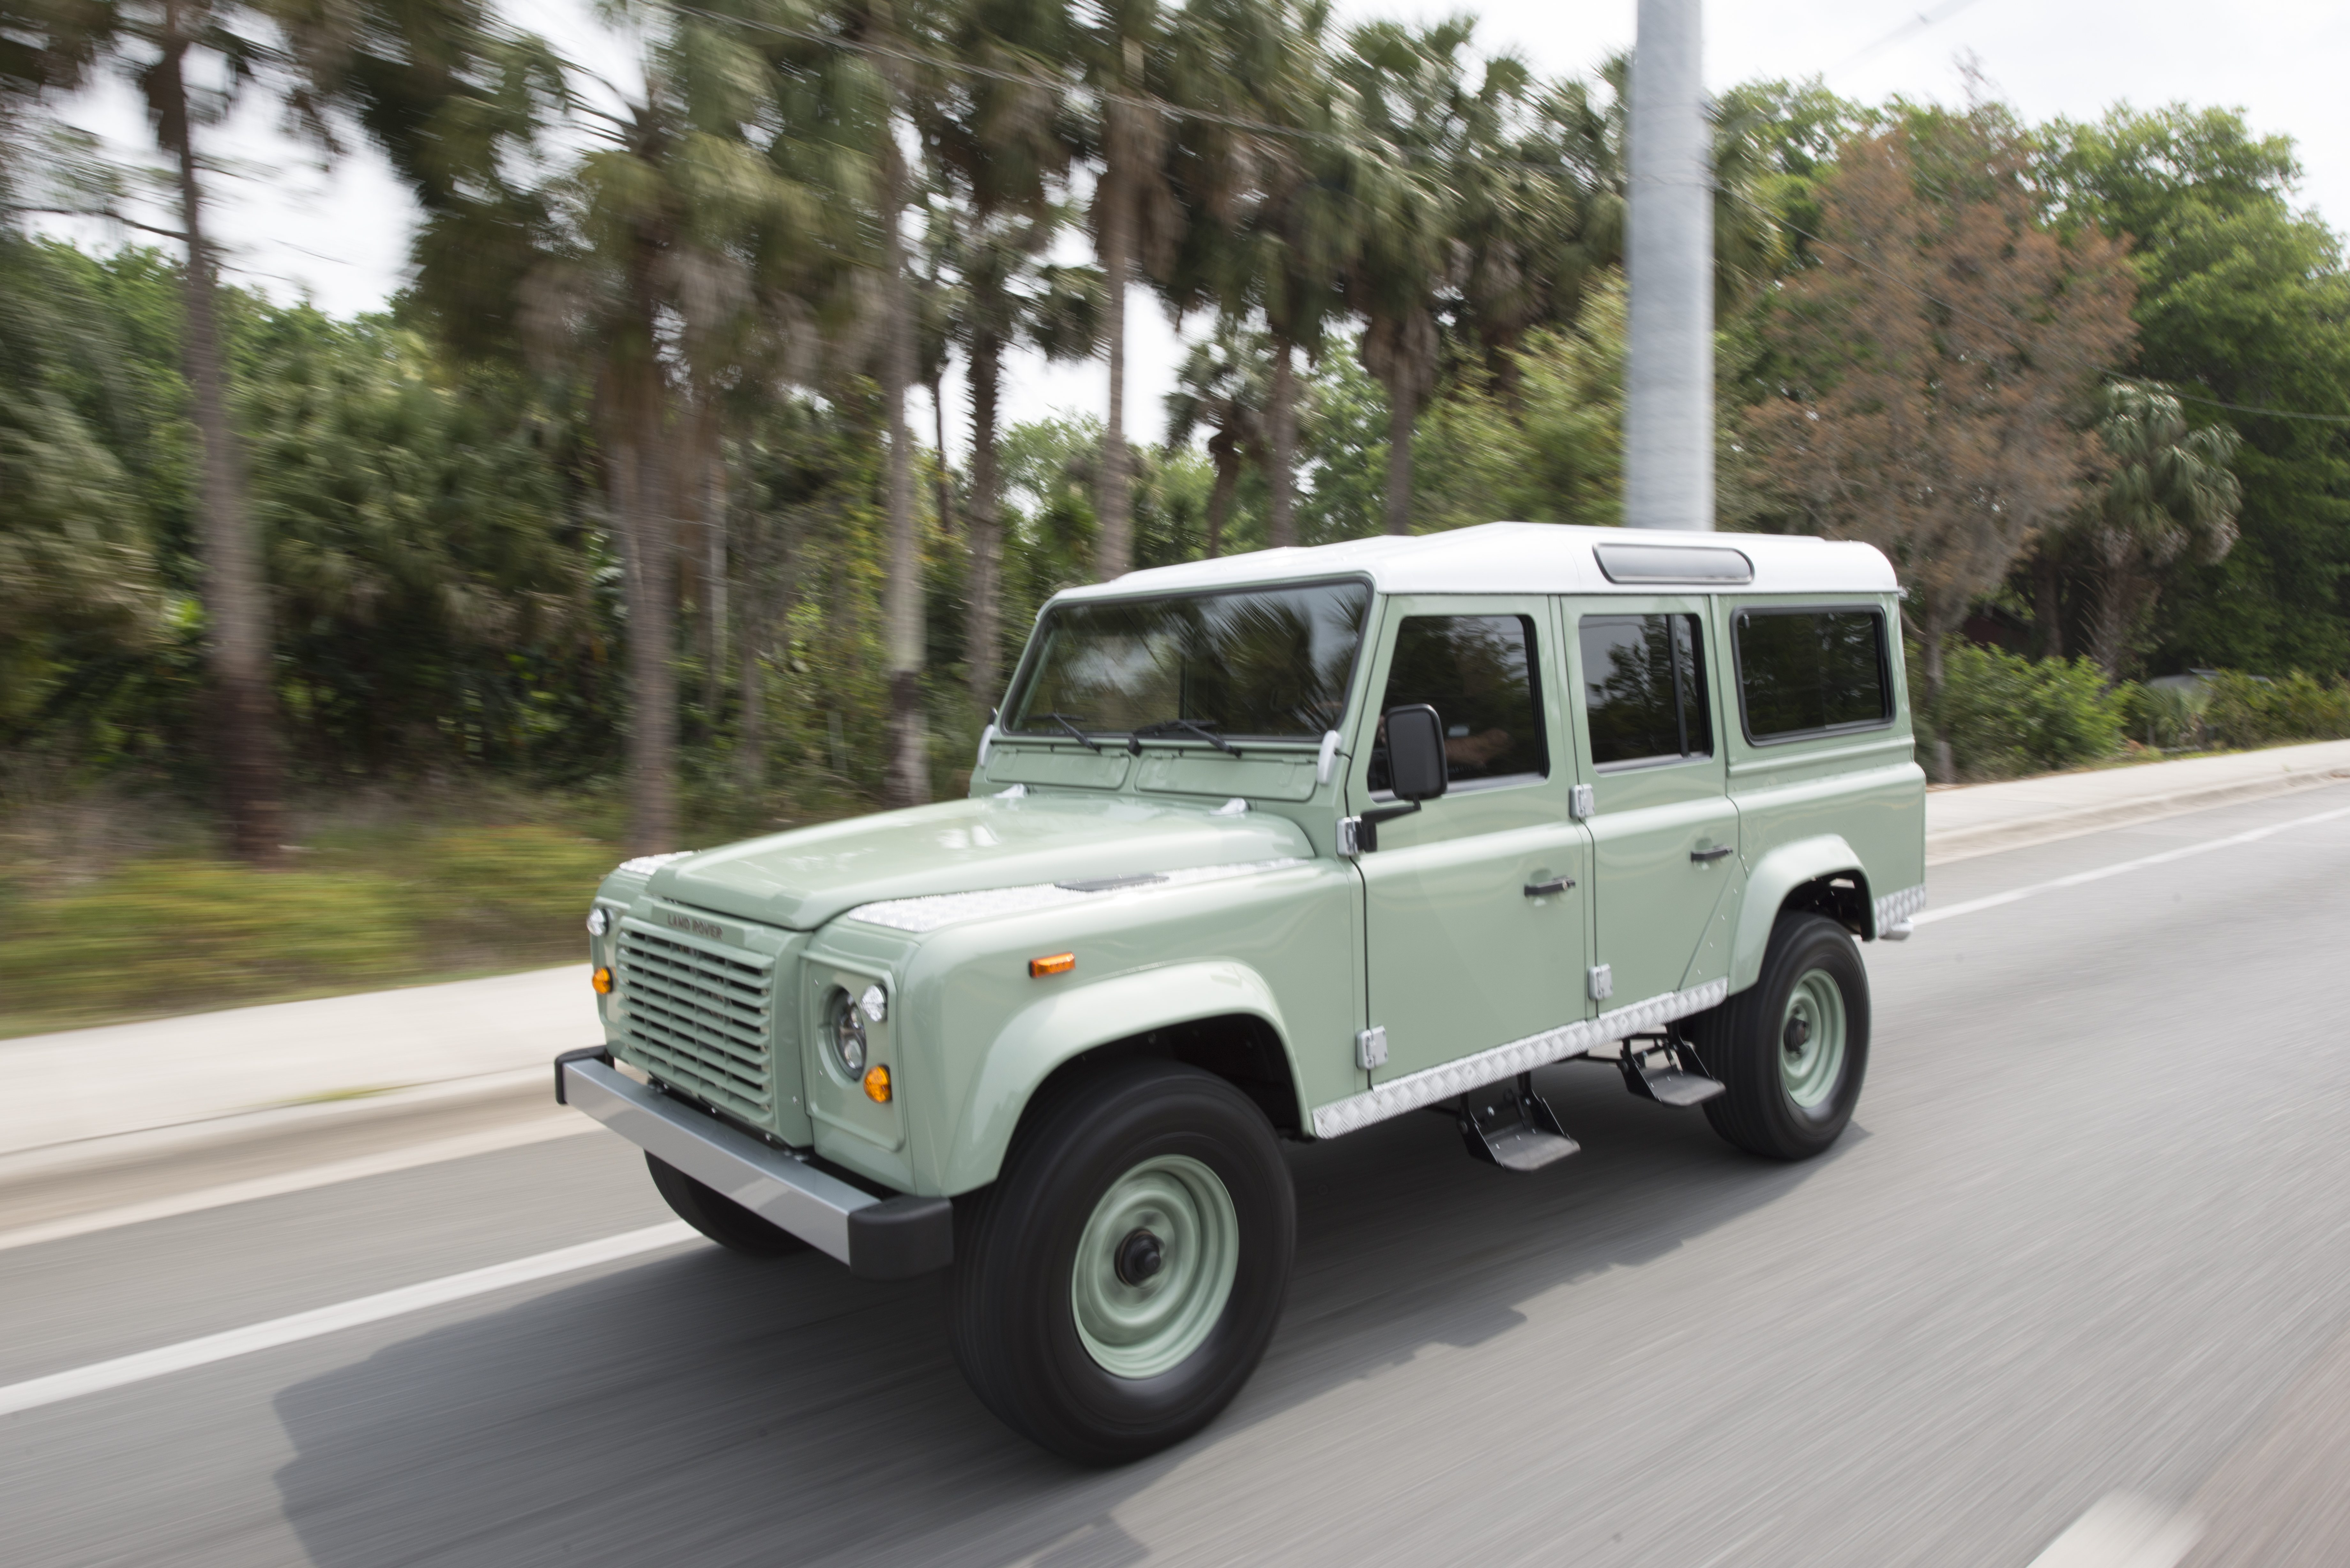 Buying a Used Defender